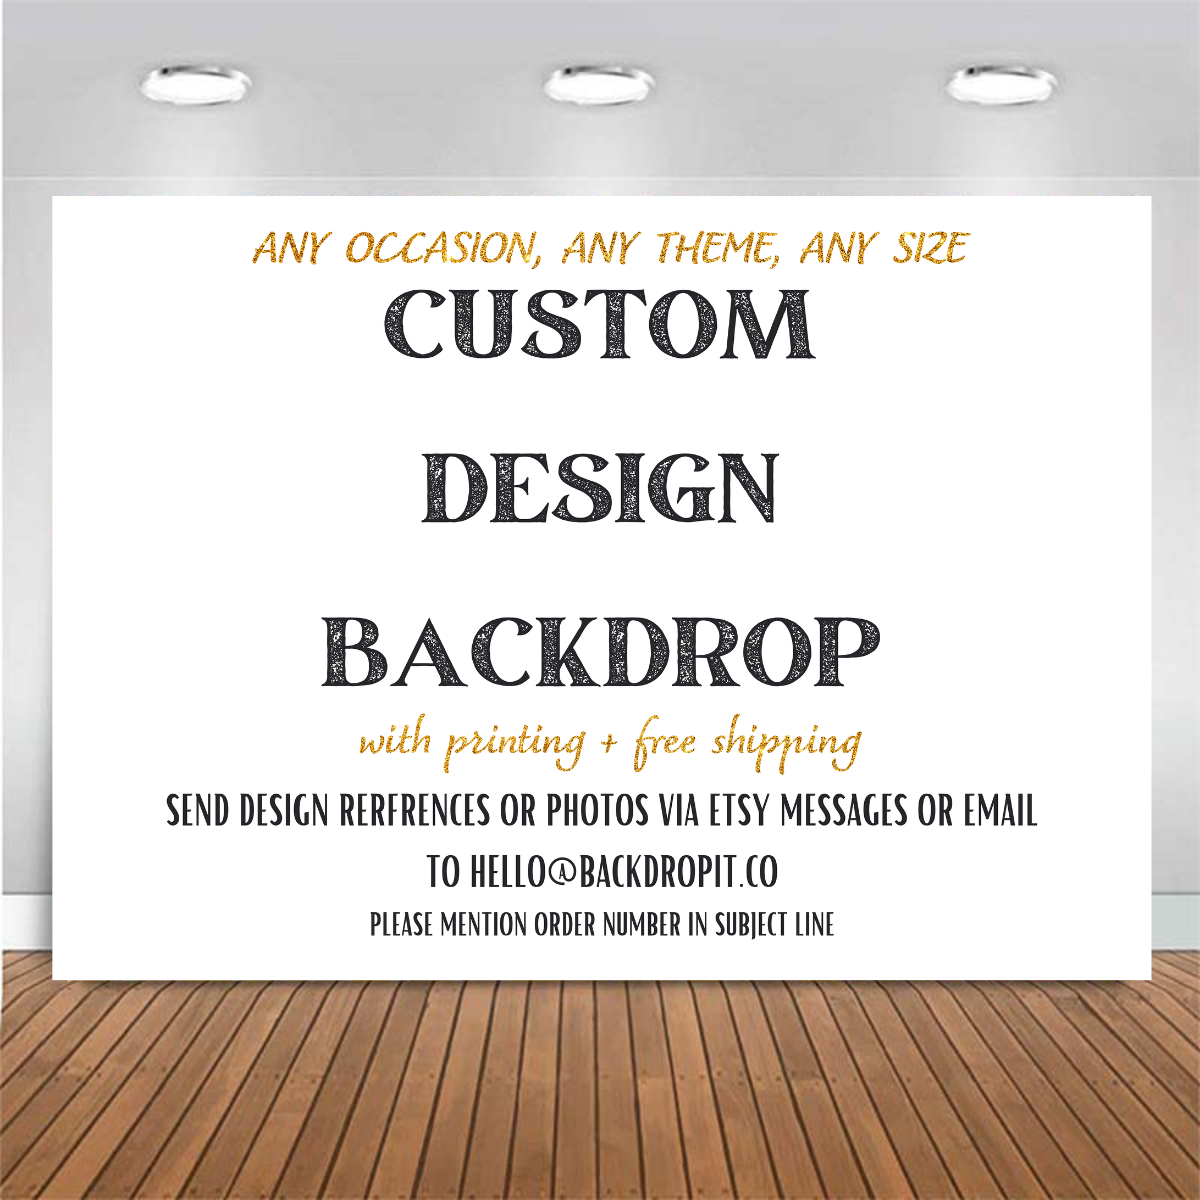 Request Custom Design for Backdrop - Any Occasion, Any Theme, Personalized Banner, Themed Party Prop for Photography and Photo Booth